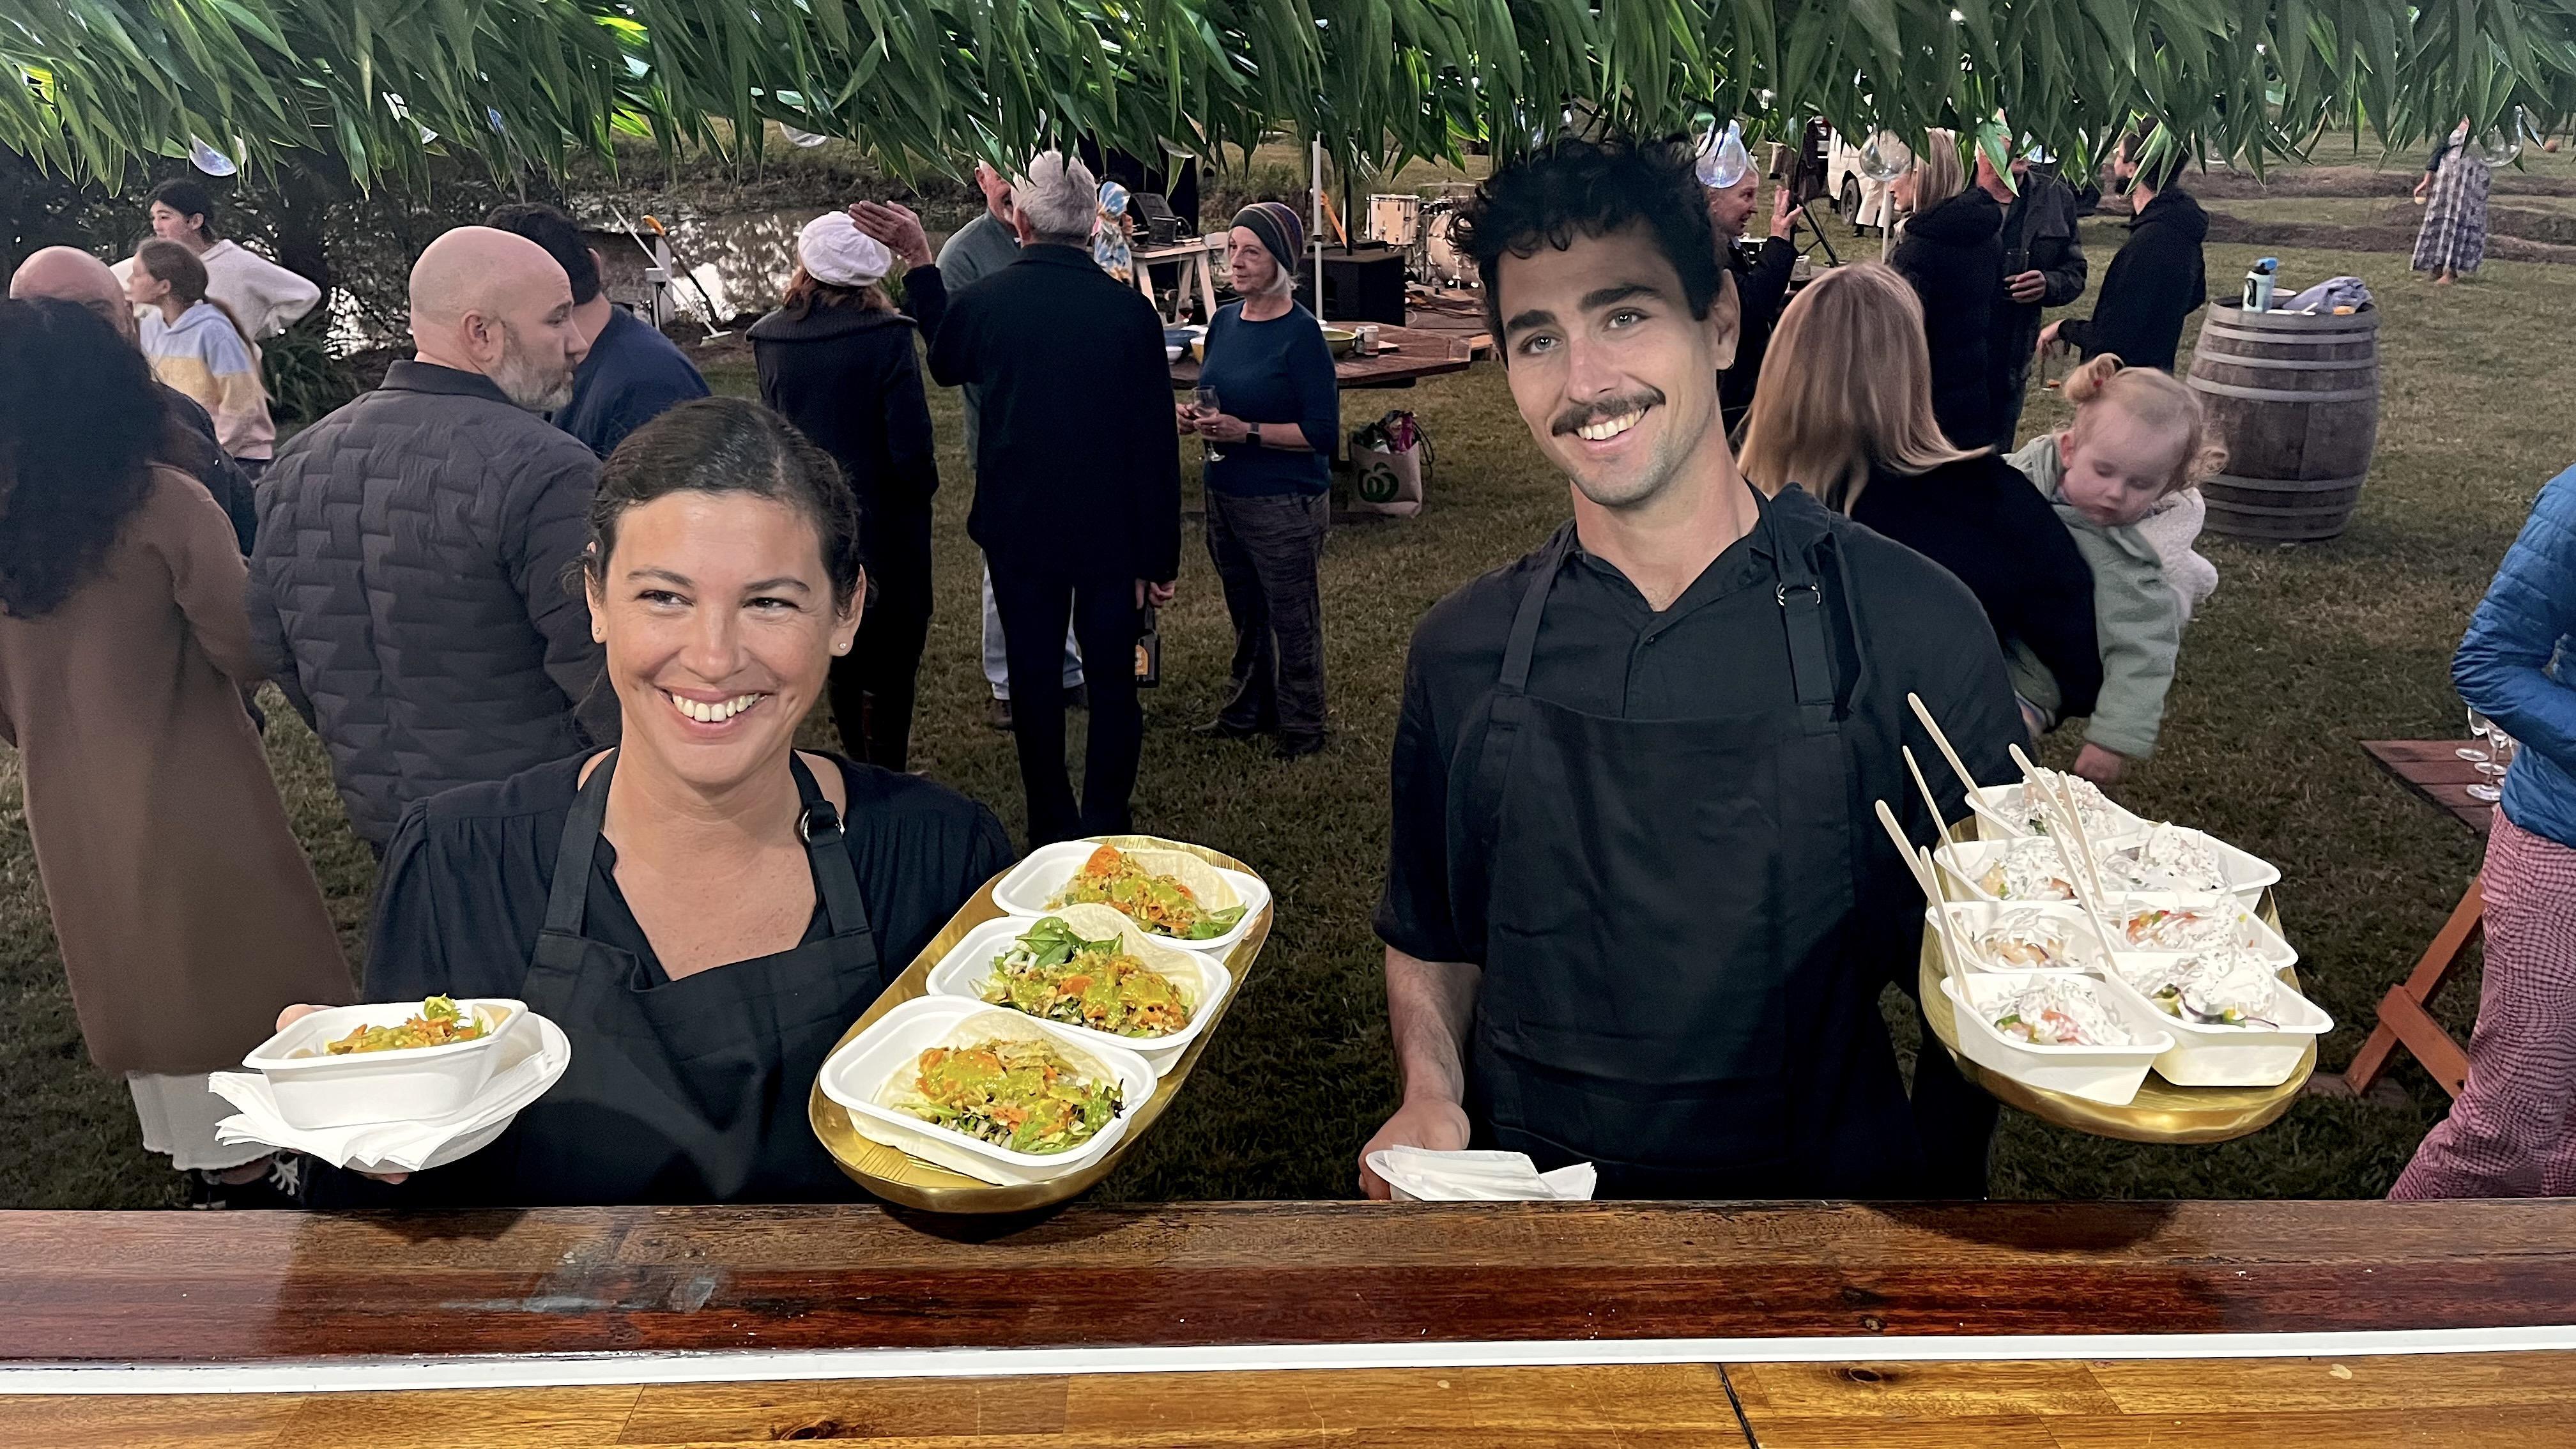 wedding catering with latin food in a food truck